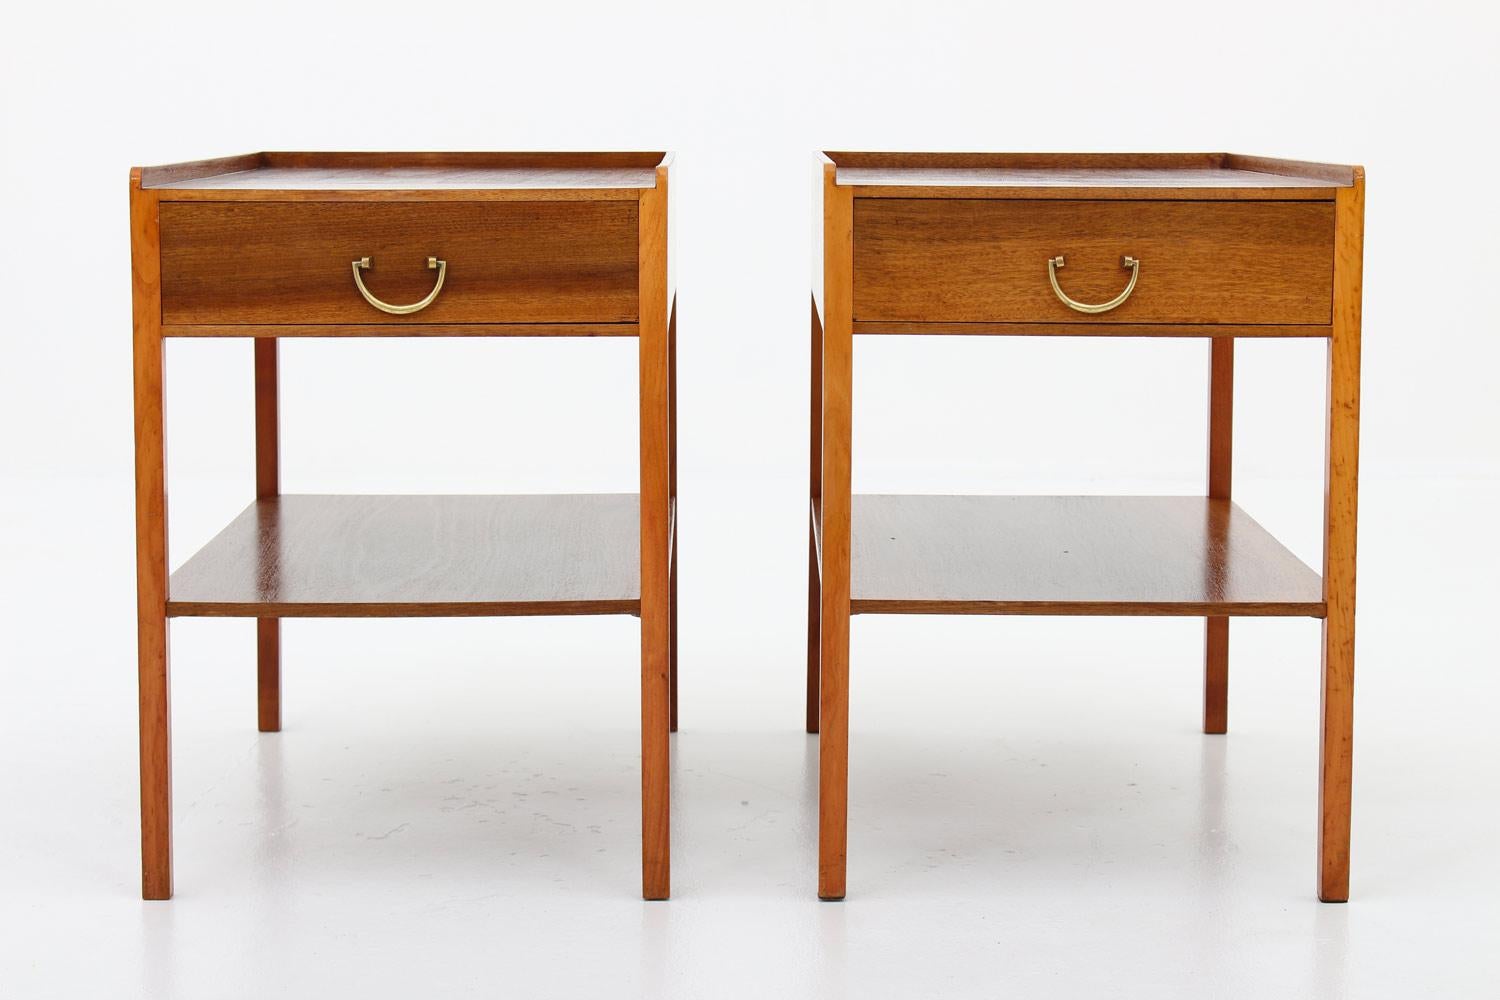 A pair of bedside tables in mahogany, model 914 by Josef Frank for Svenskt Tenn, 1950s.
These bedside tables show a very minimal design with great details. 
Condition: Very good restored condition.